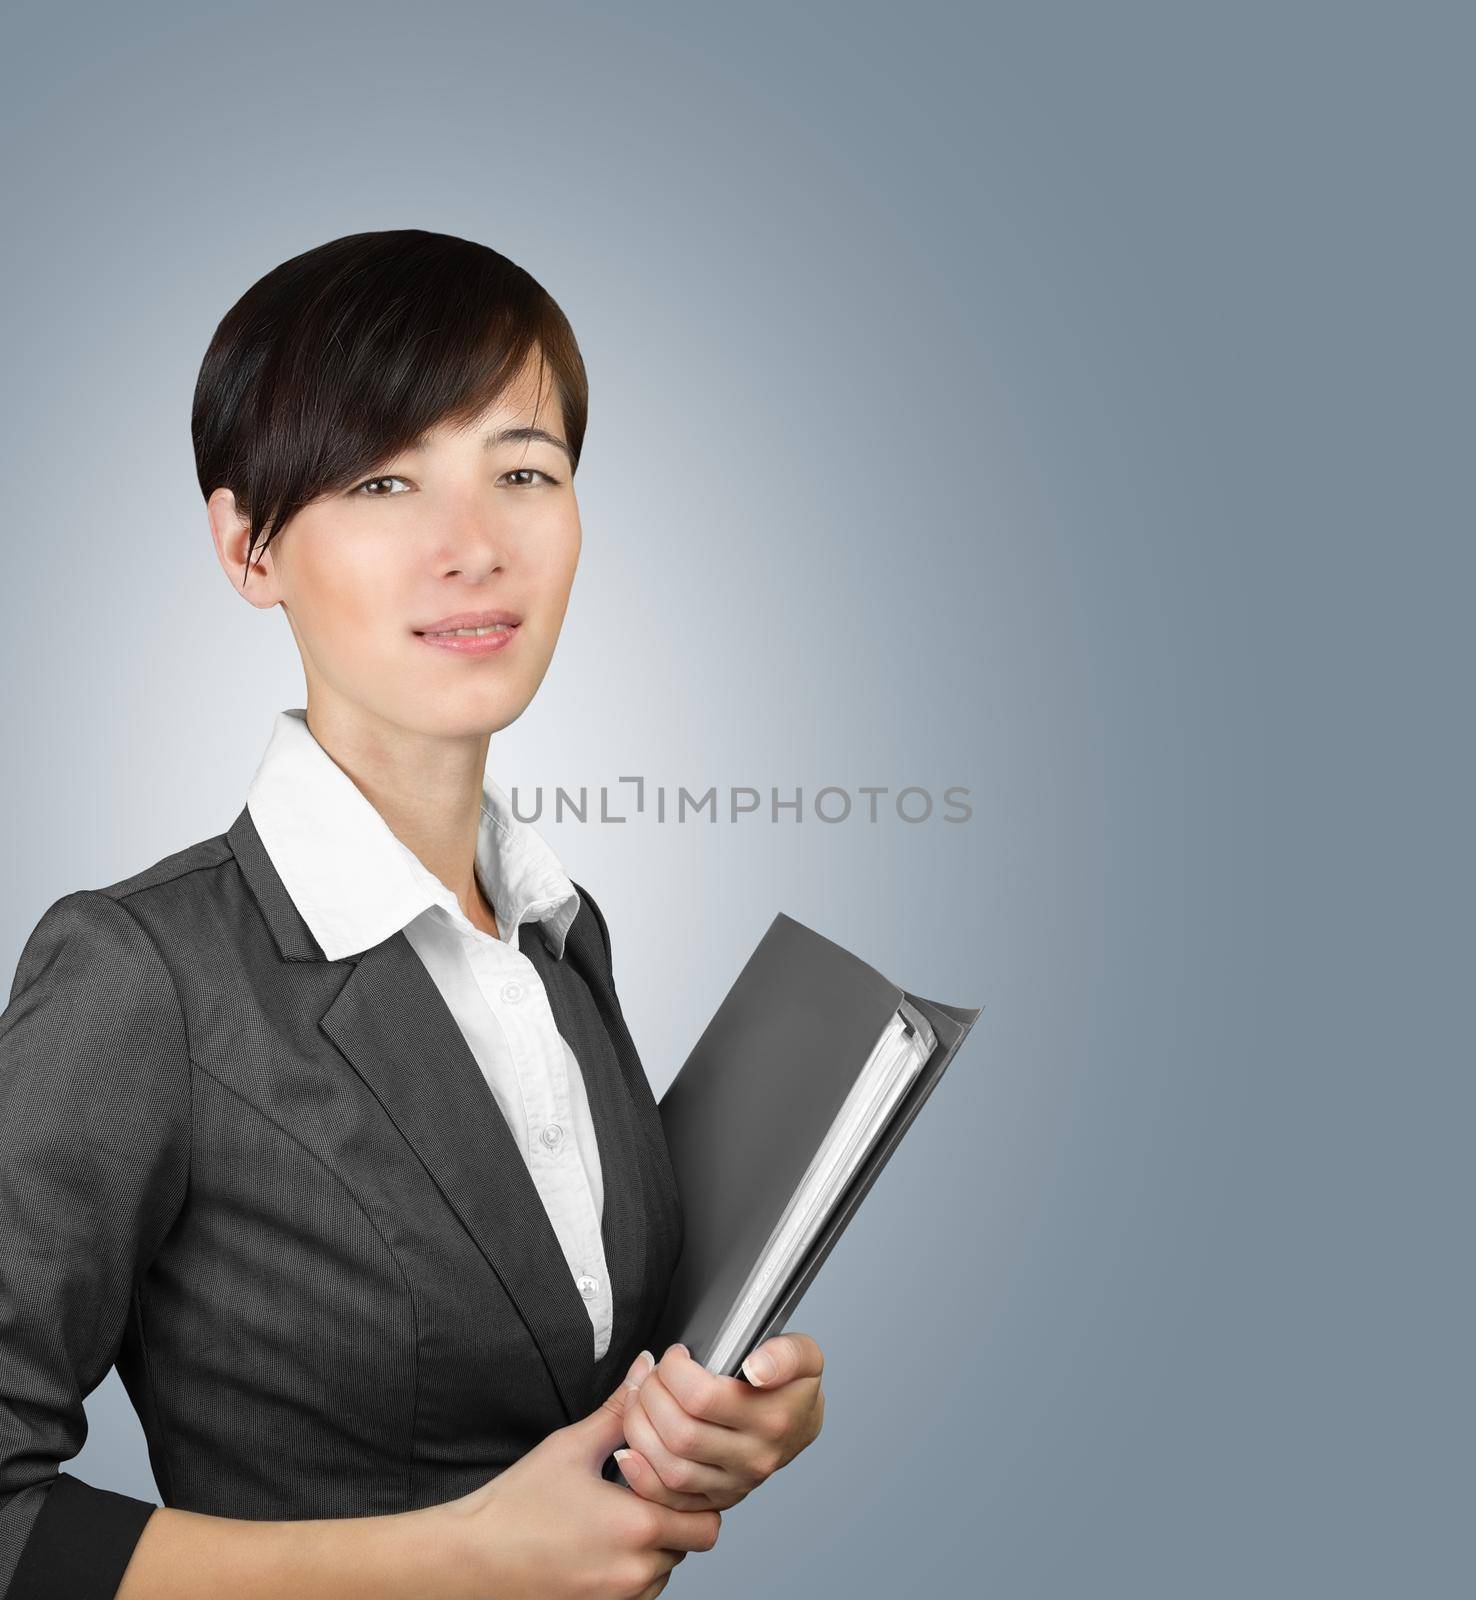 Business woman with a folder on a gray background